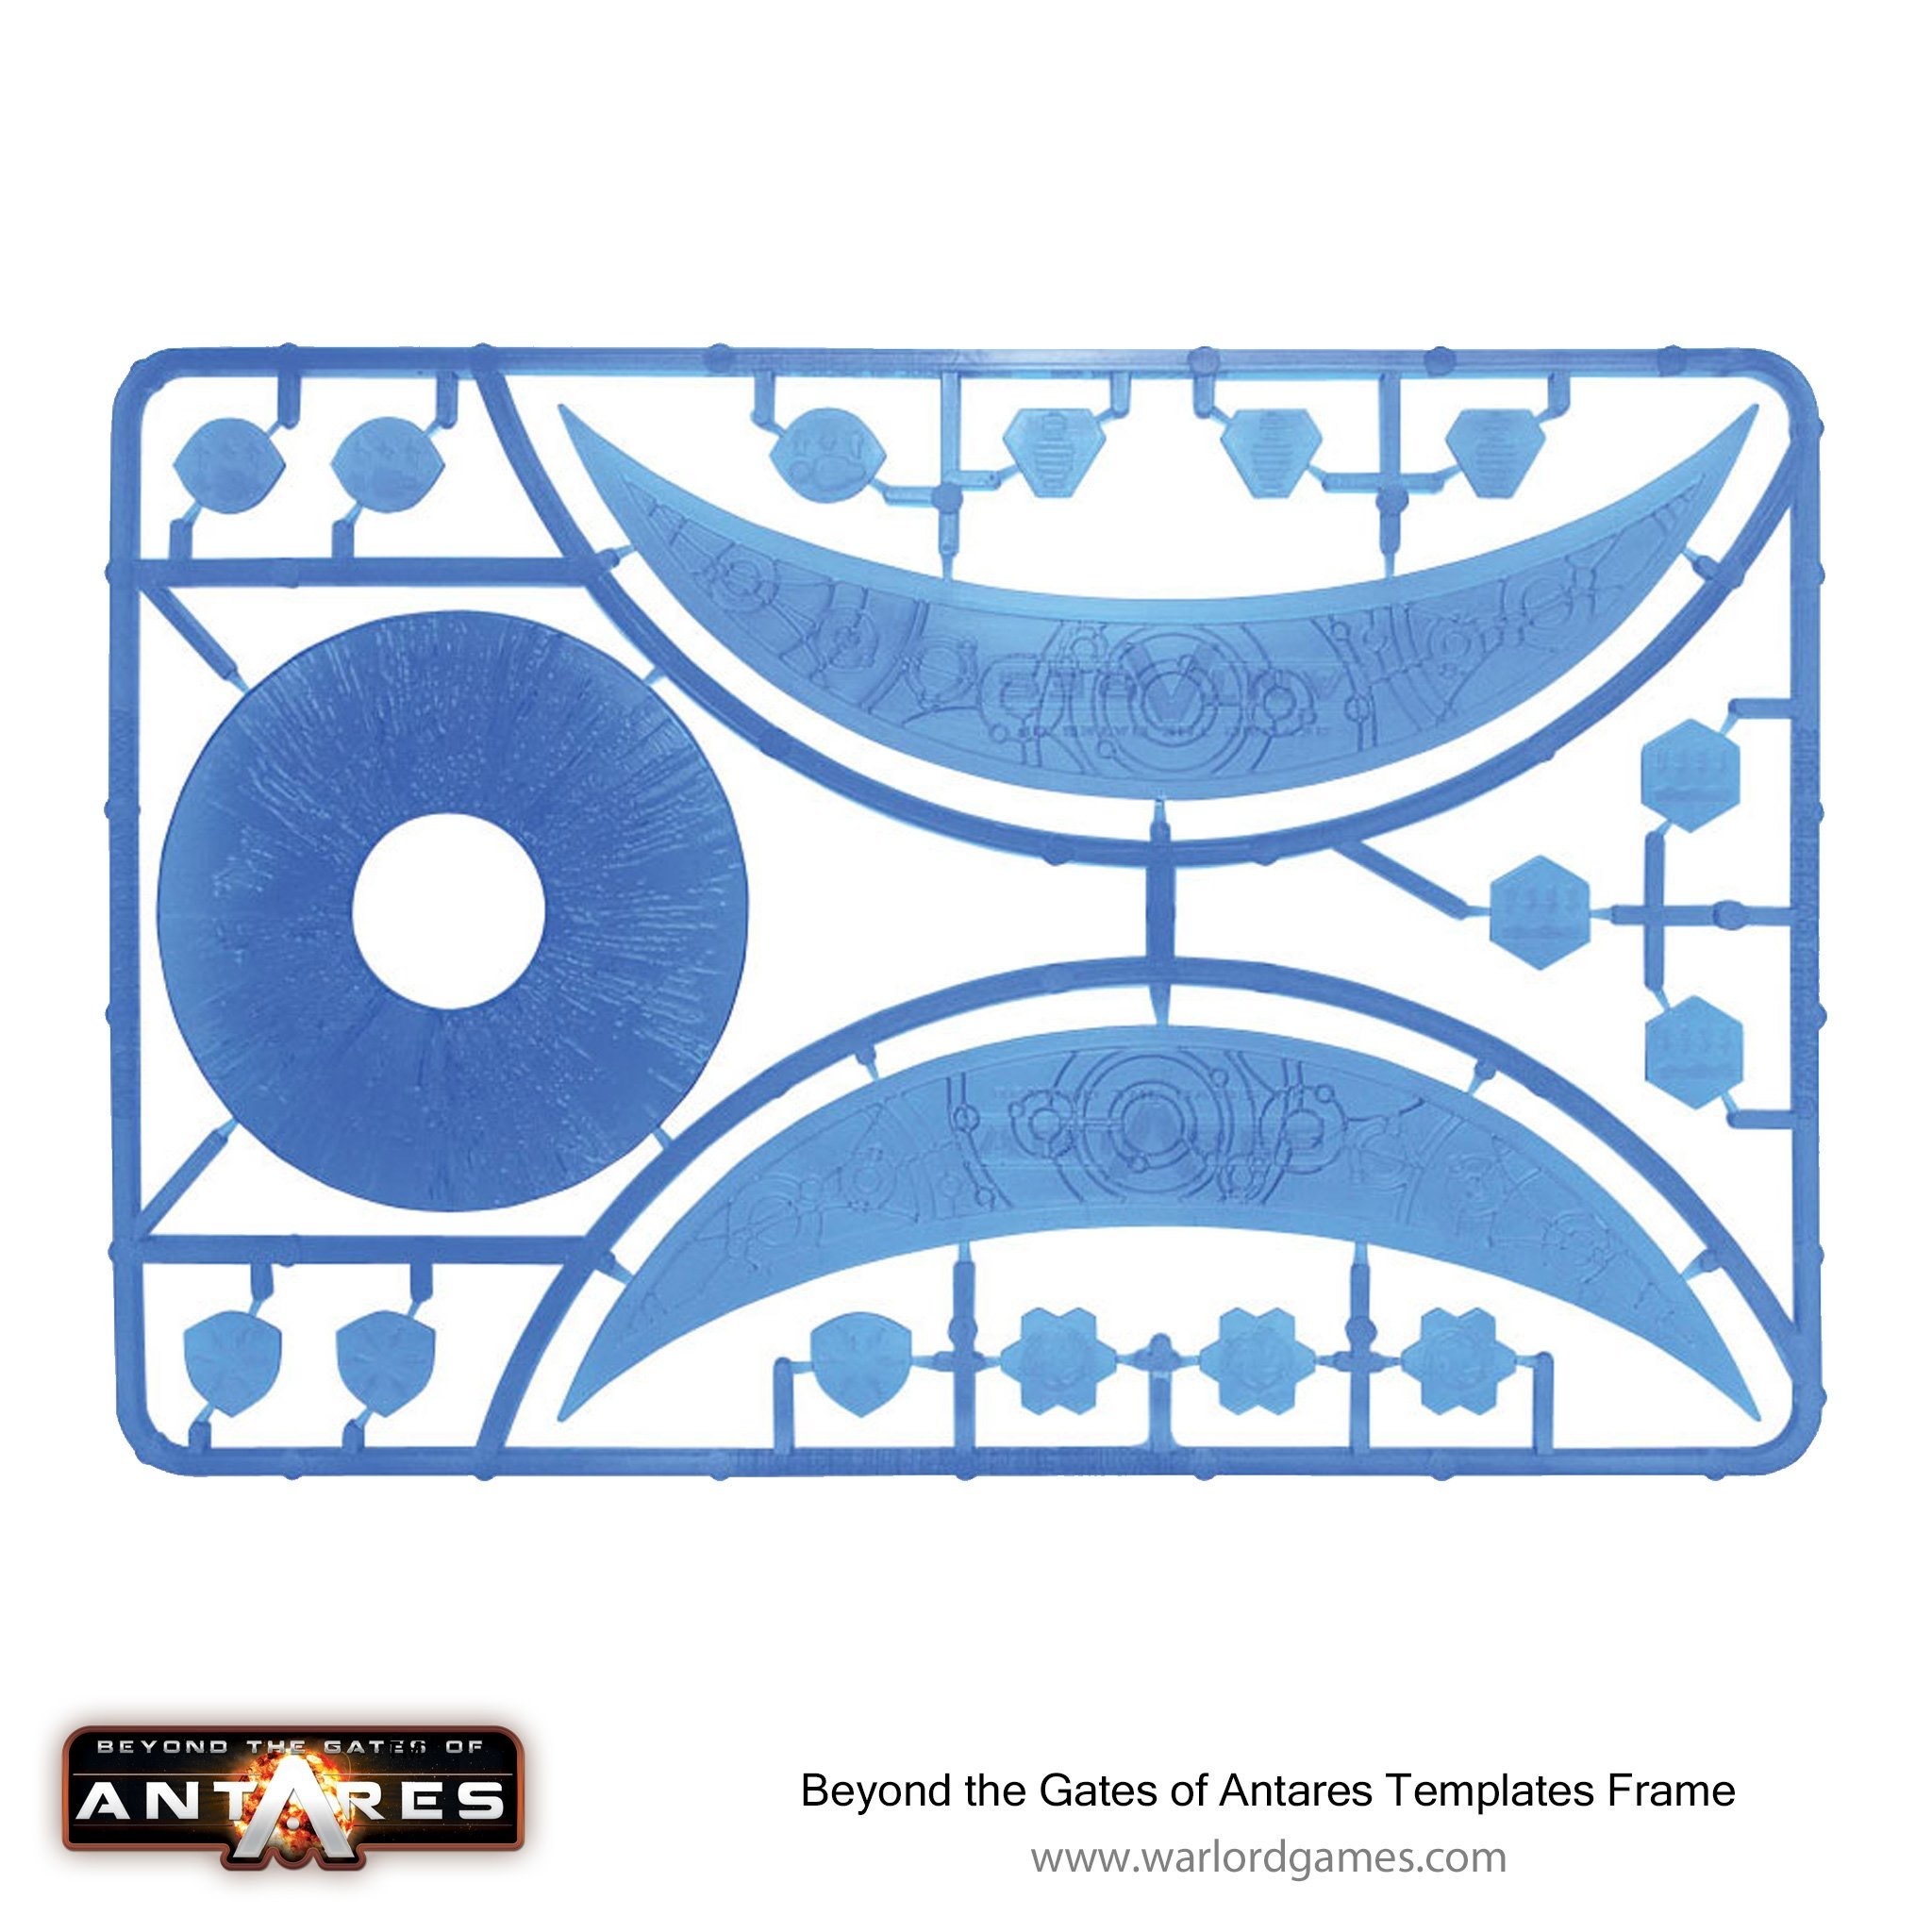 Warlord games Beyond the Gates of Antares: Templates